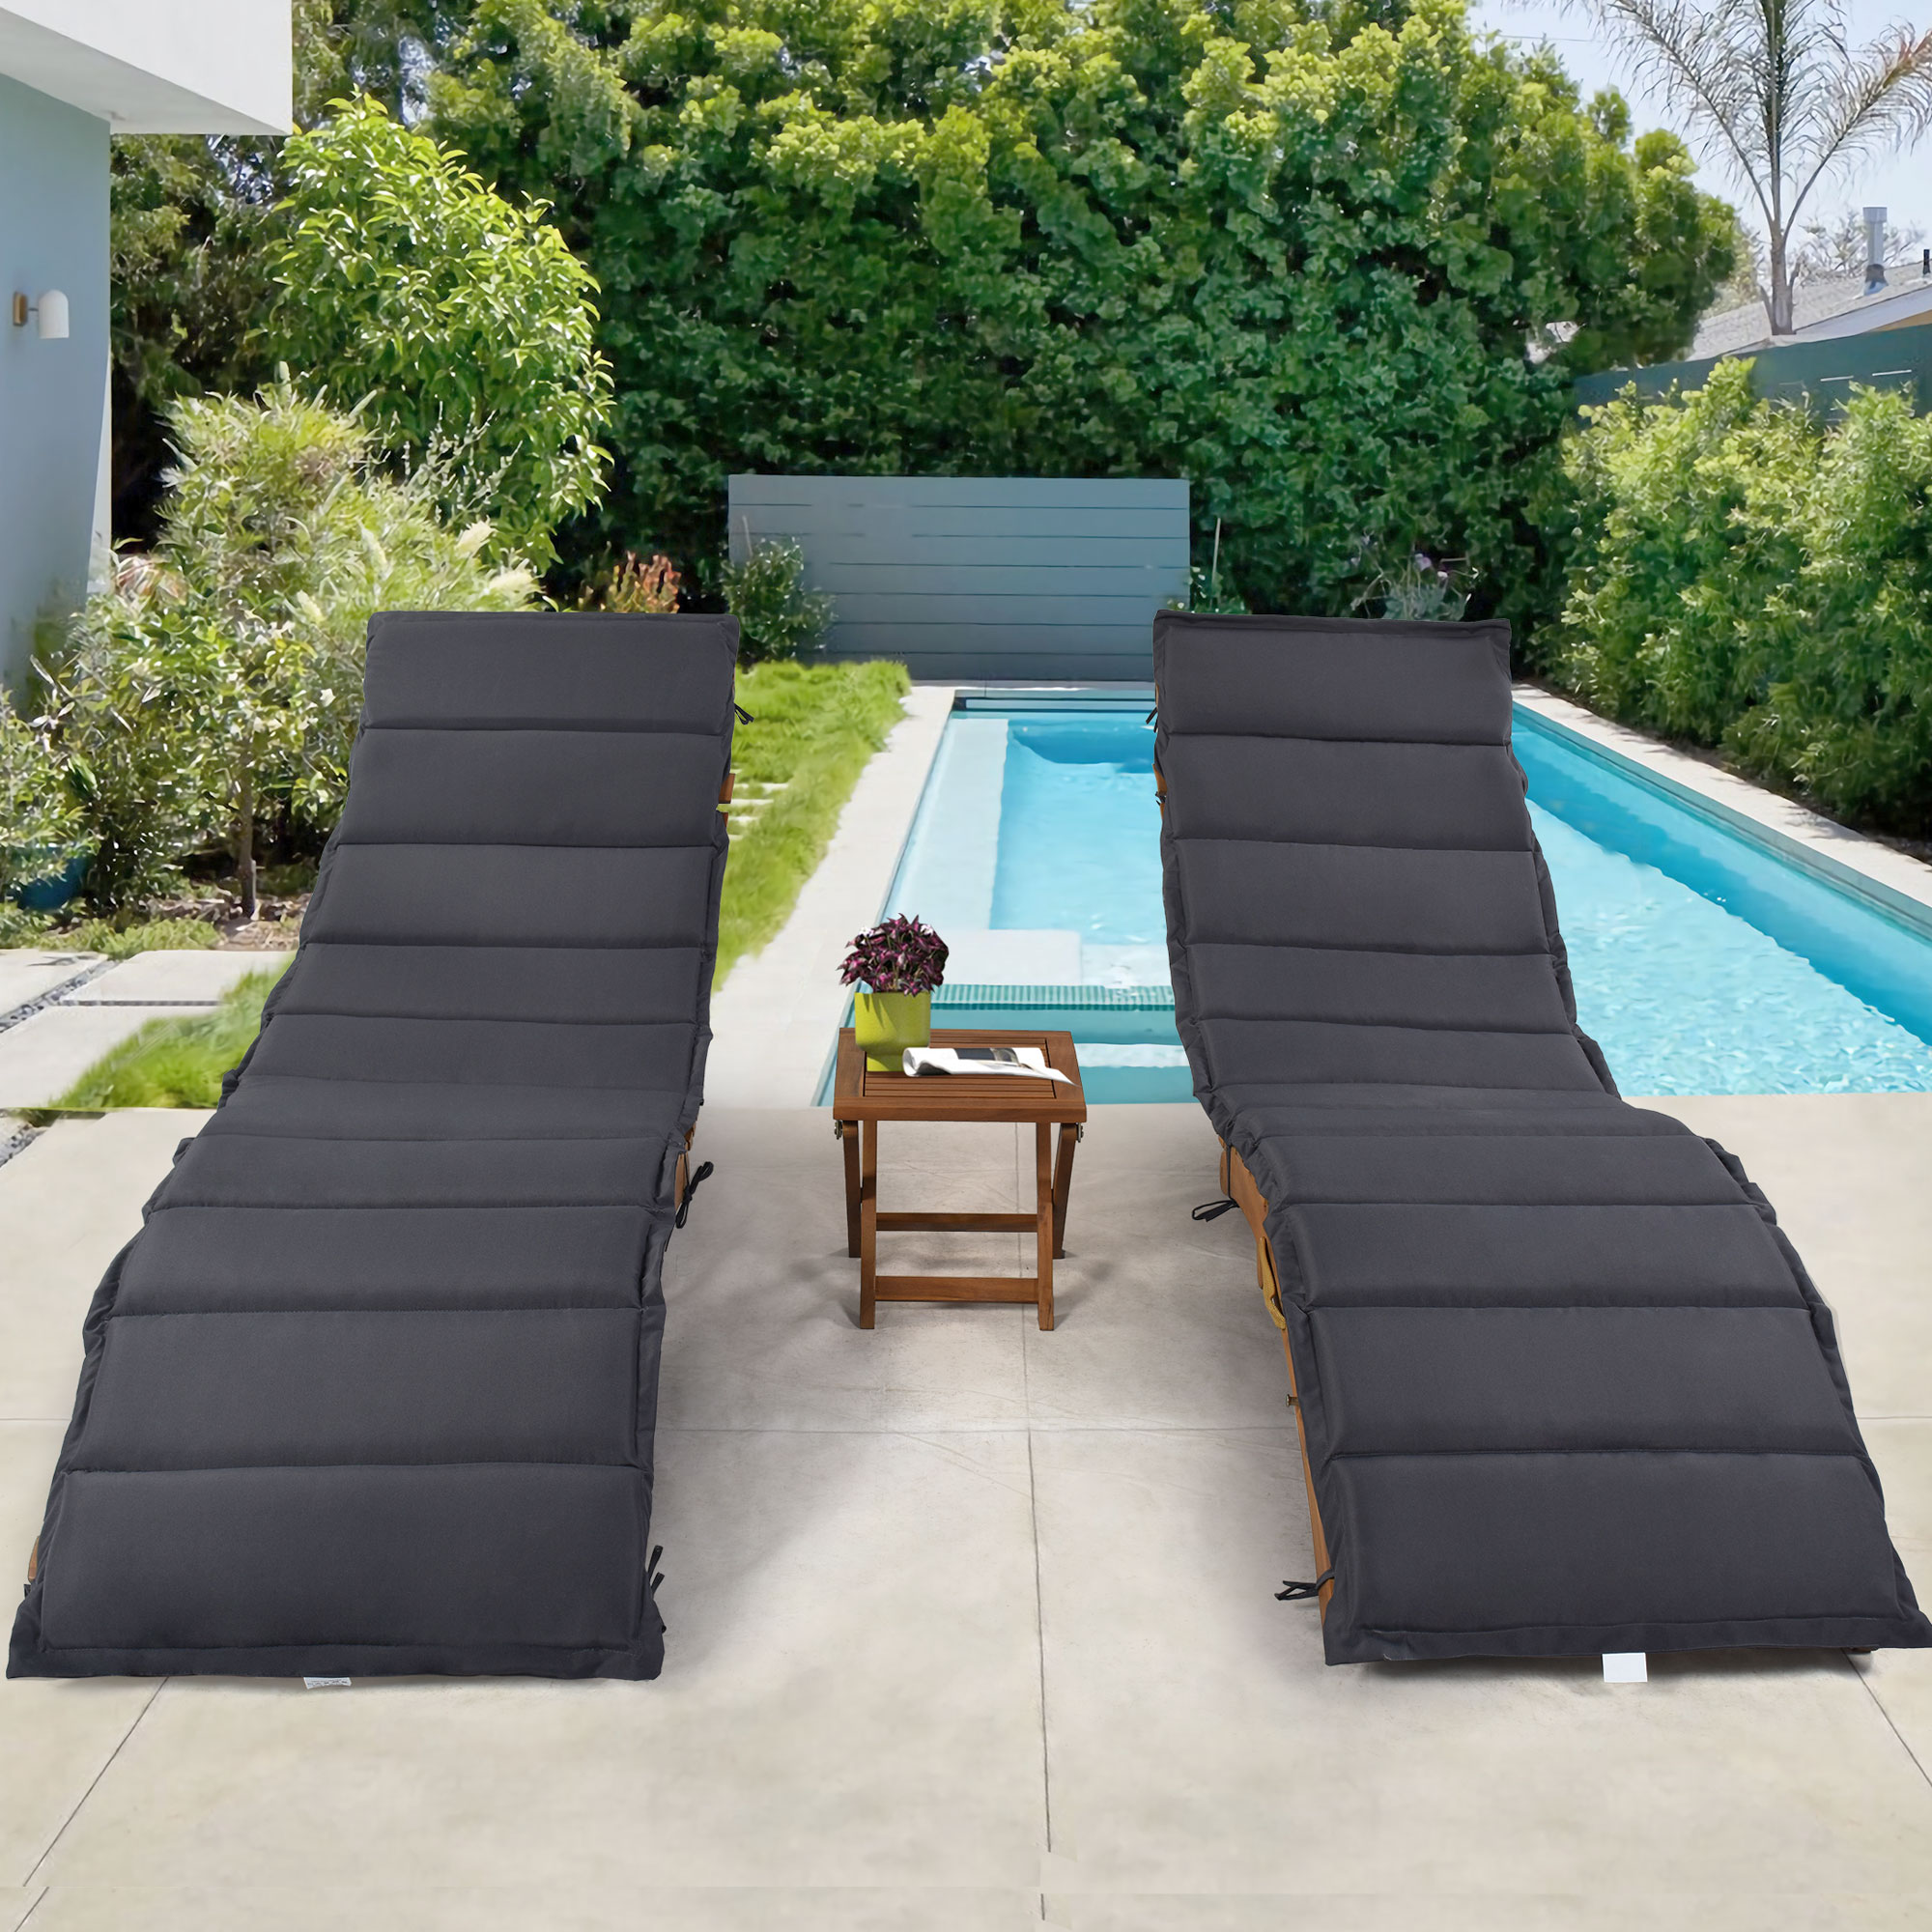 Chaise Lounge Chairs for Outside, SYNGAR 3 Piece Patio Lounge Chaise Chairs Set with Matching Table, Outdoor Extended Sun Loungers with Cushions, Wood Recliner Chairs for Yard, Poolside, Garden, D7434 - image 2 of 12